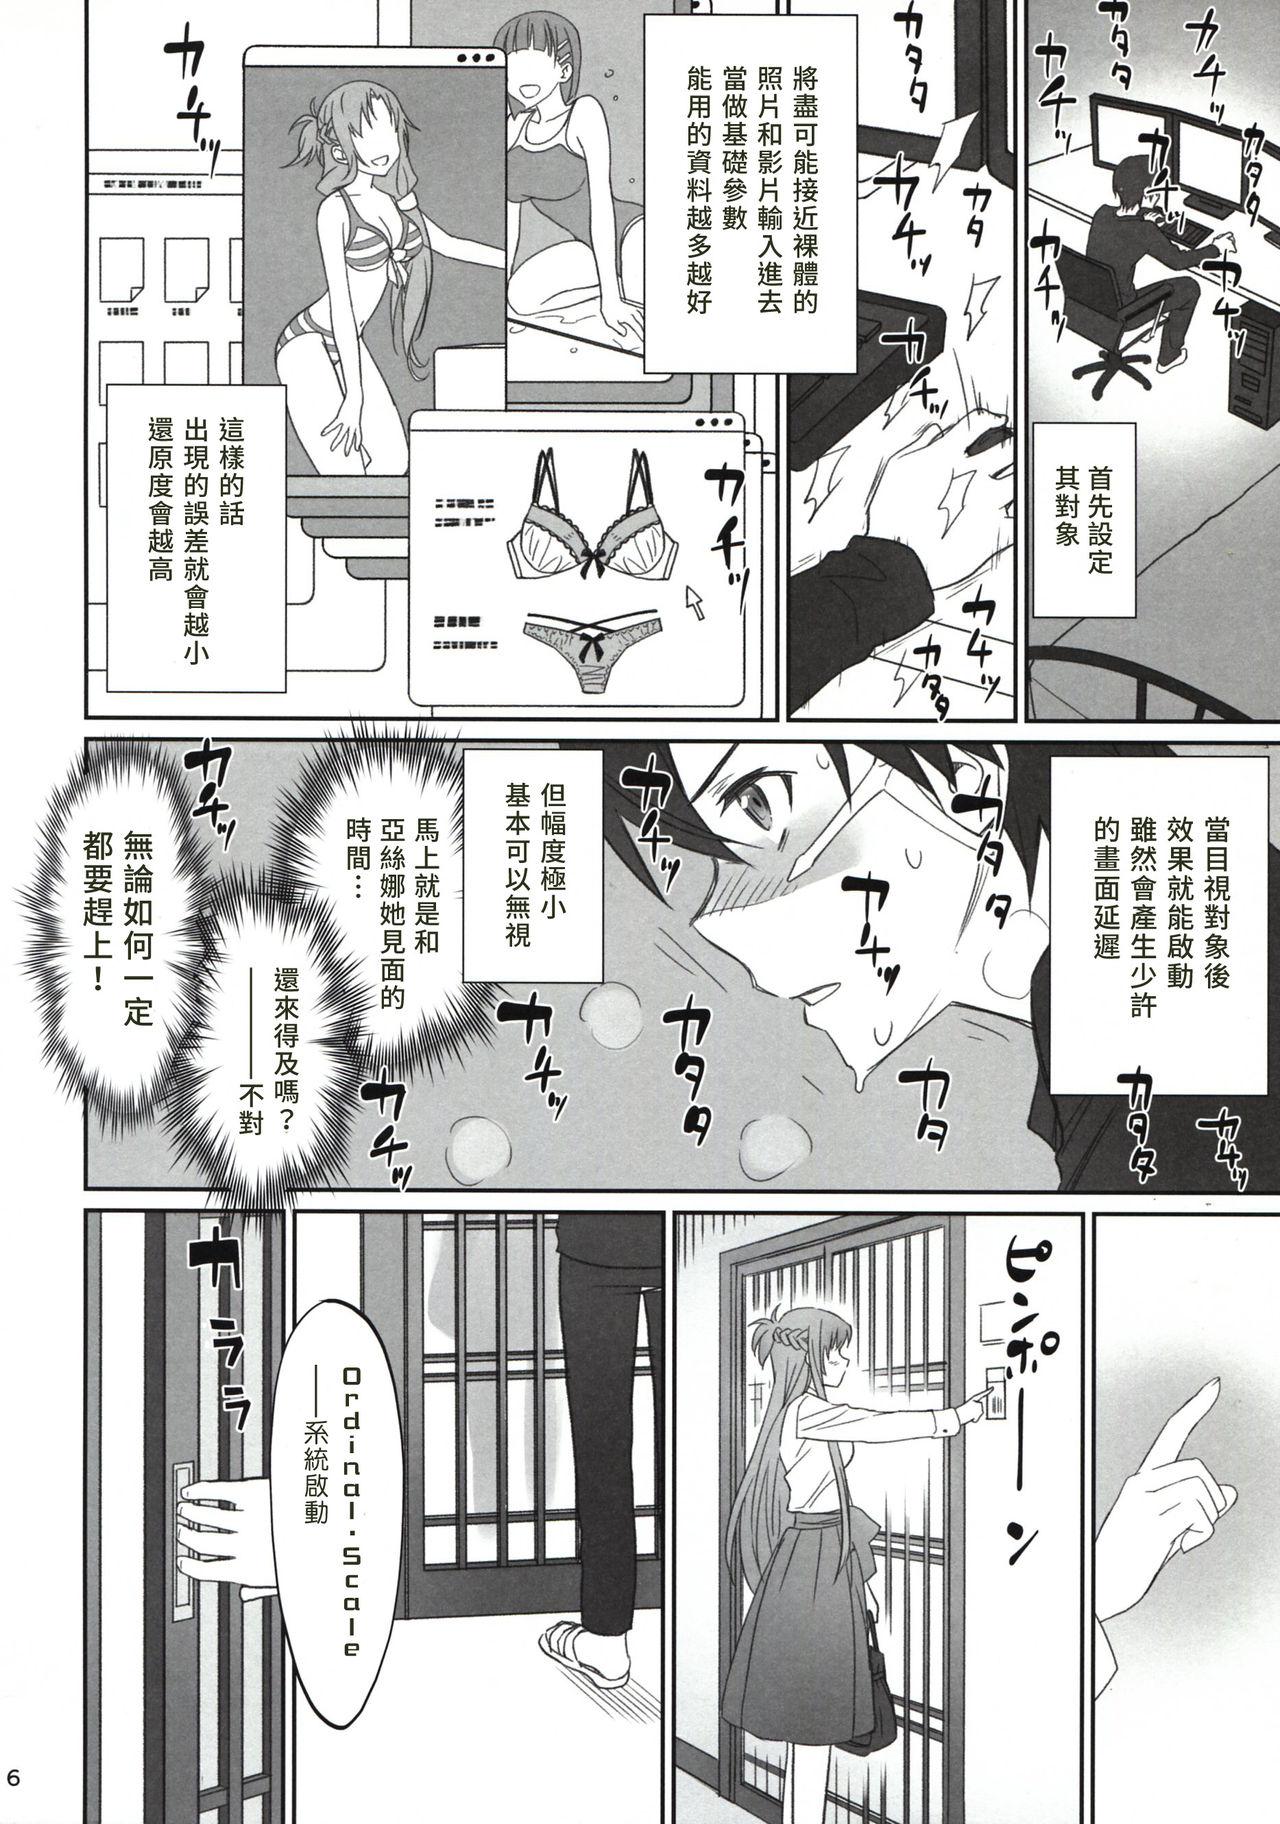 Amature Allure Voyeuristic Disorder - Sword art online Gay Ass Fucking - Page 6